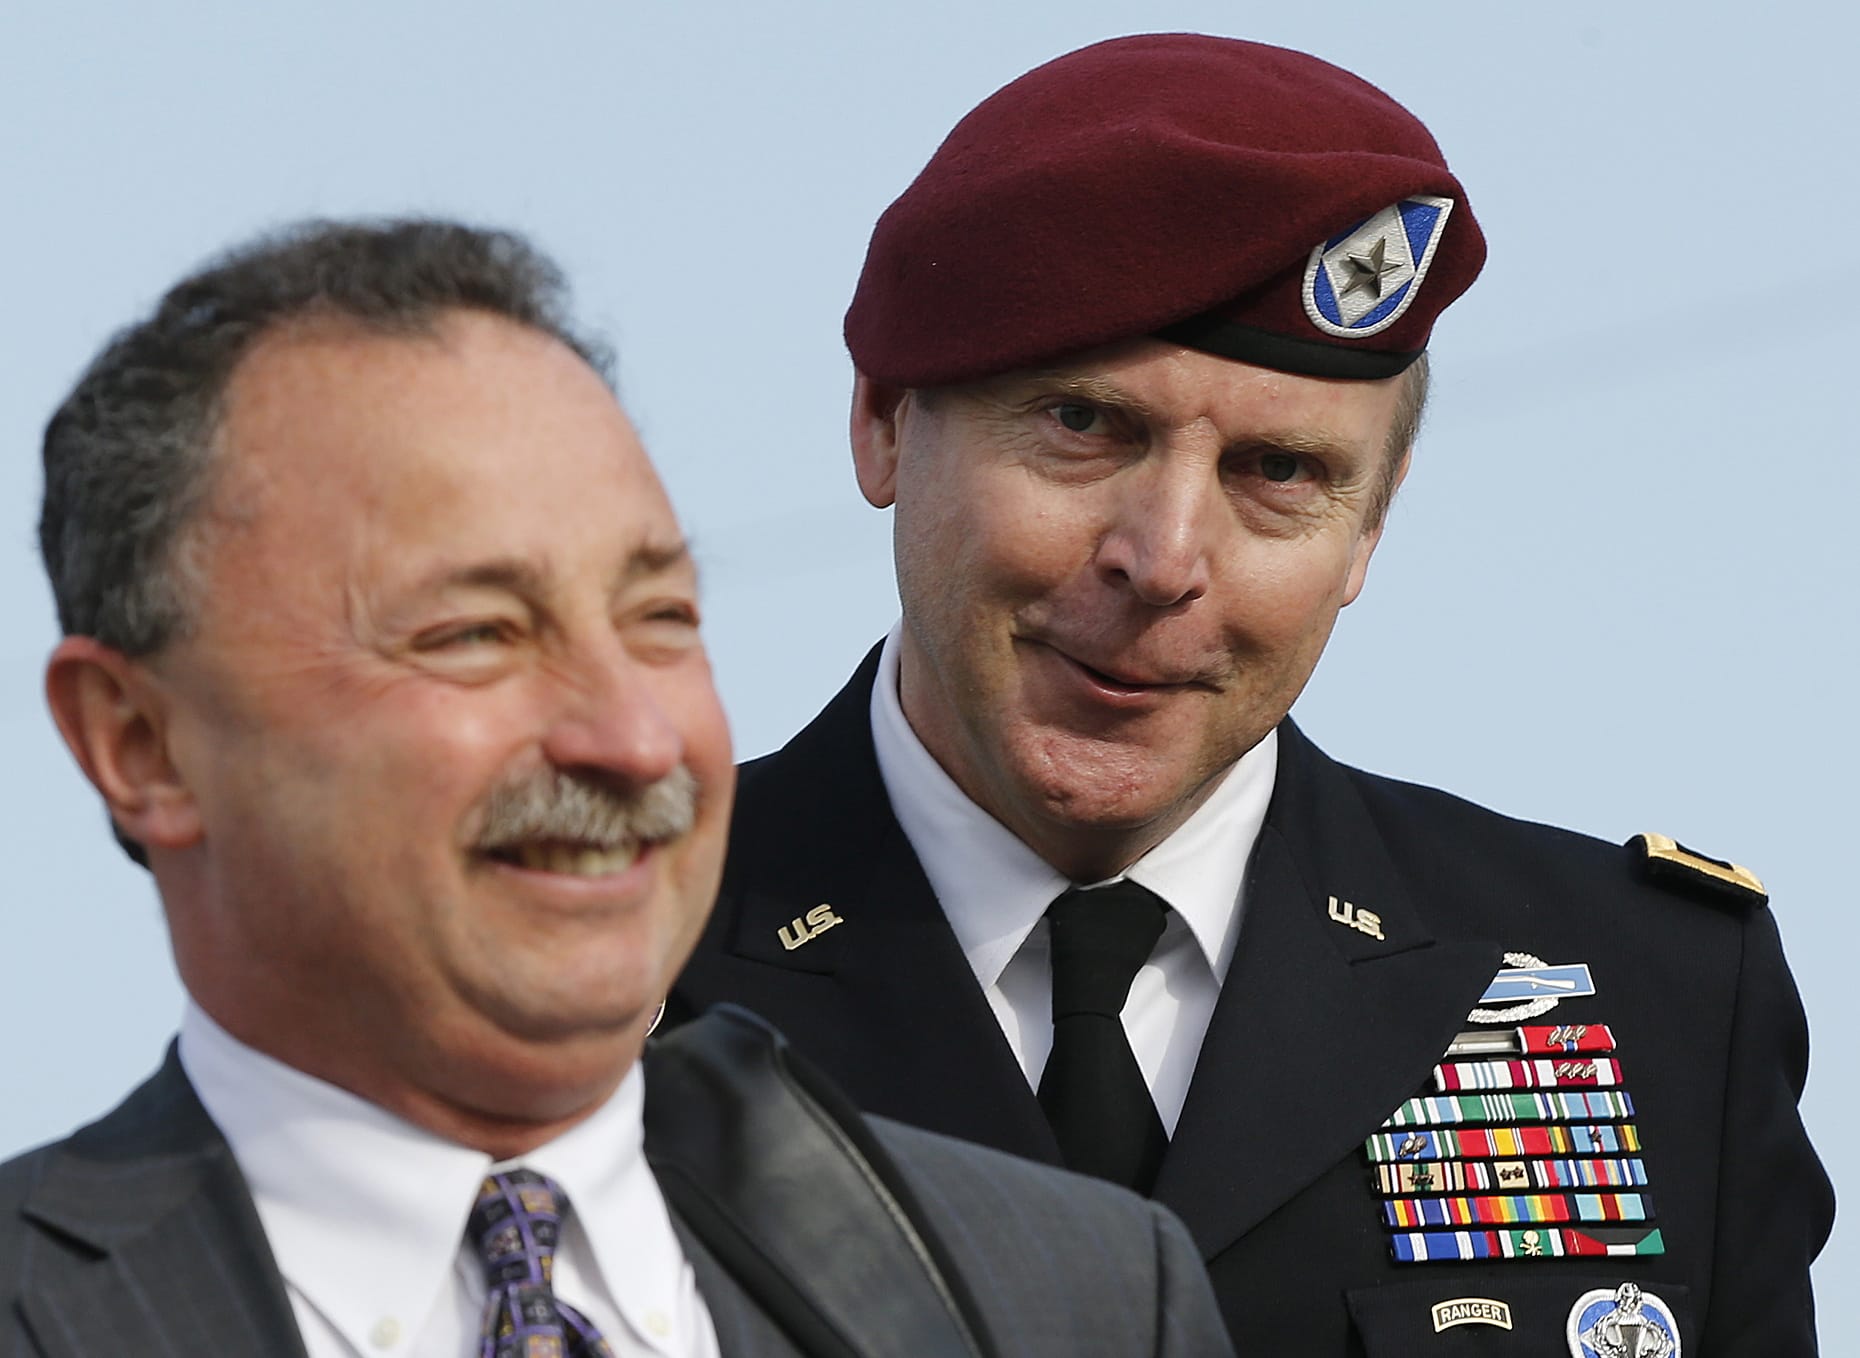 Brig. Gen. Jeffrey Sinclair, right, who admitted to inappropriate relationships with three subordinates, arrives at the courthouse with attorney Richard Scheff for sentencing Fort Bragg, N.C., Thursday, March 20, 2014.